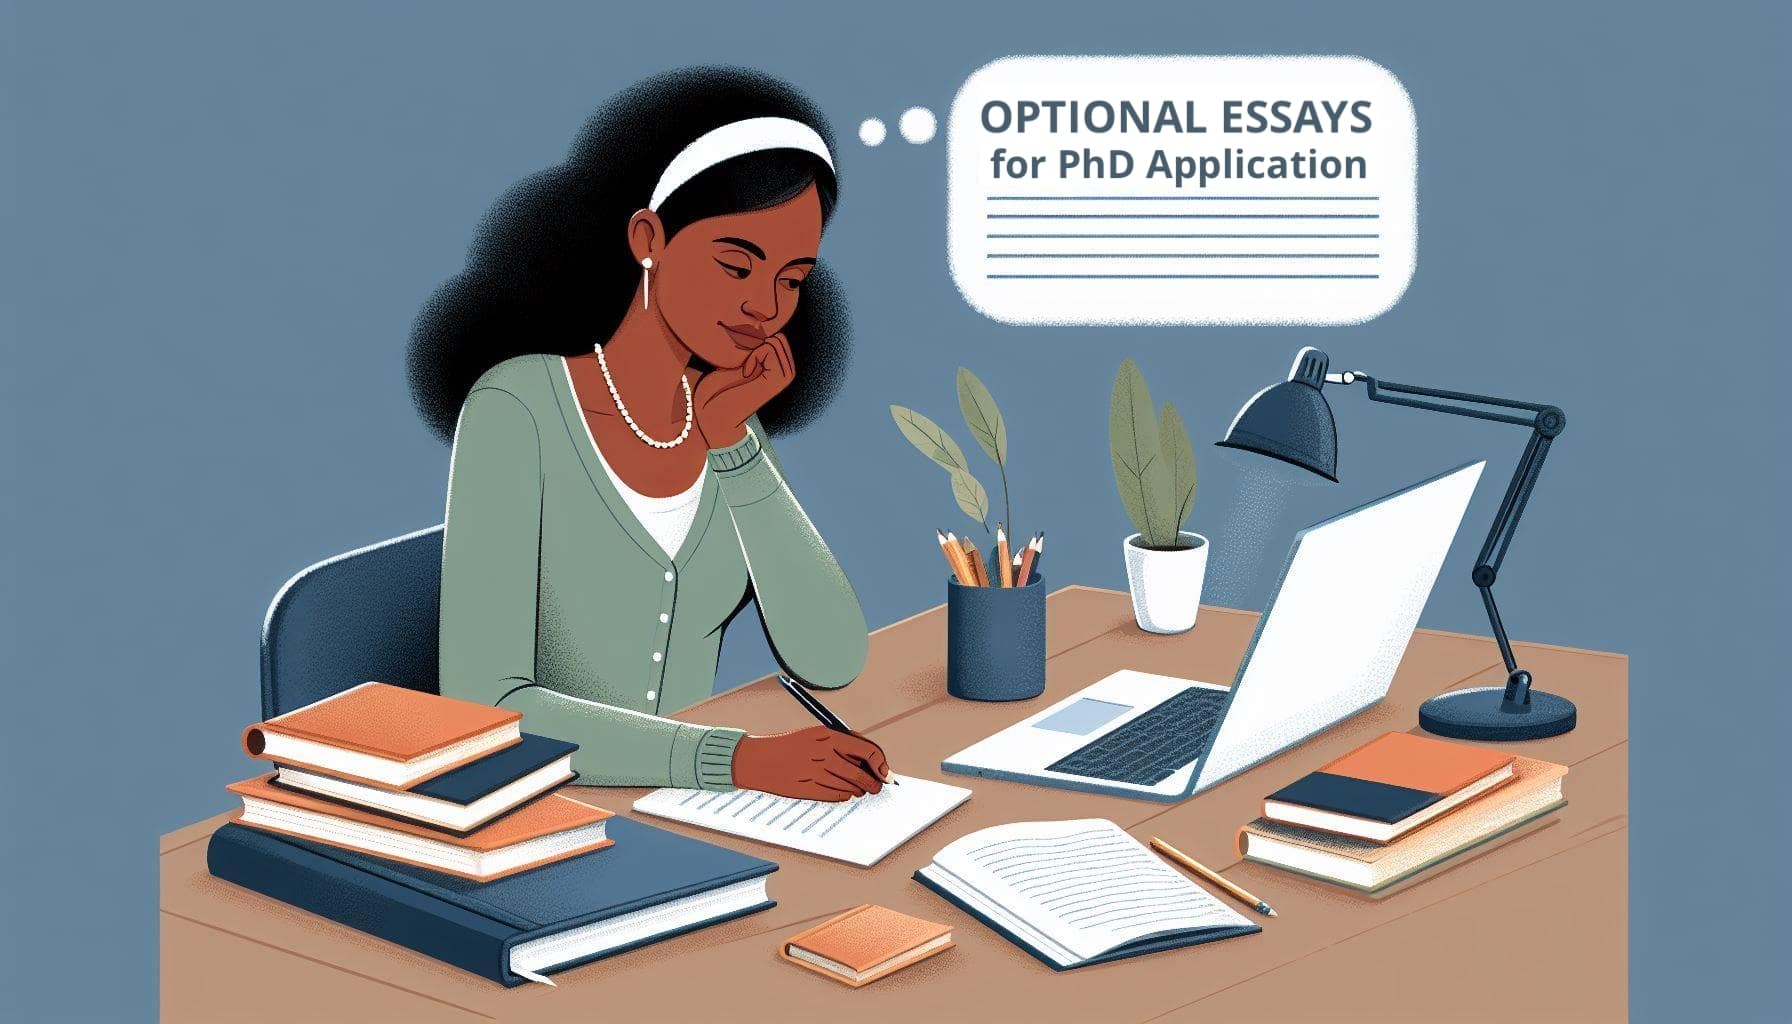 Optional Essays for PhD Application. A student is sitting and wondering is she should write the optional essay for phd application